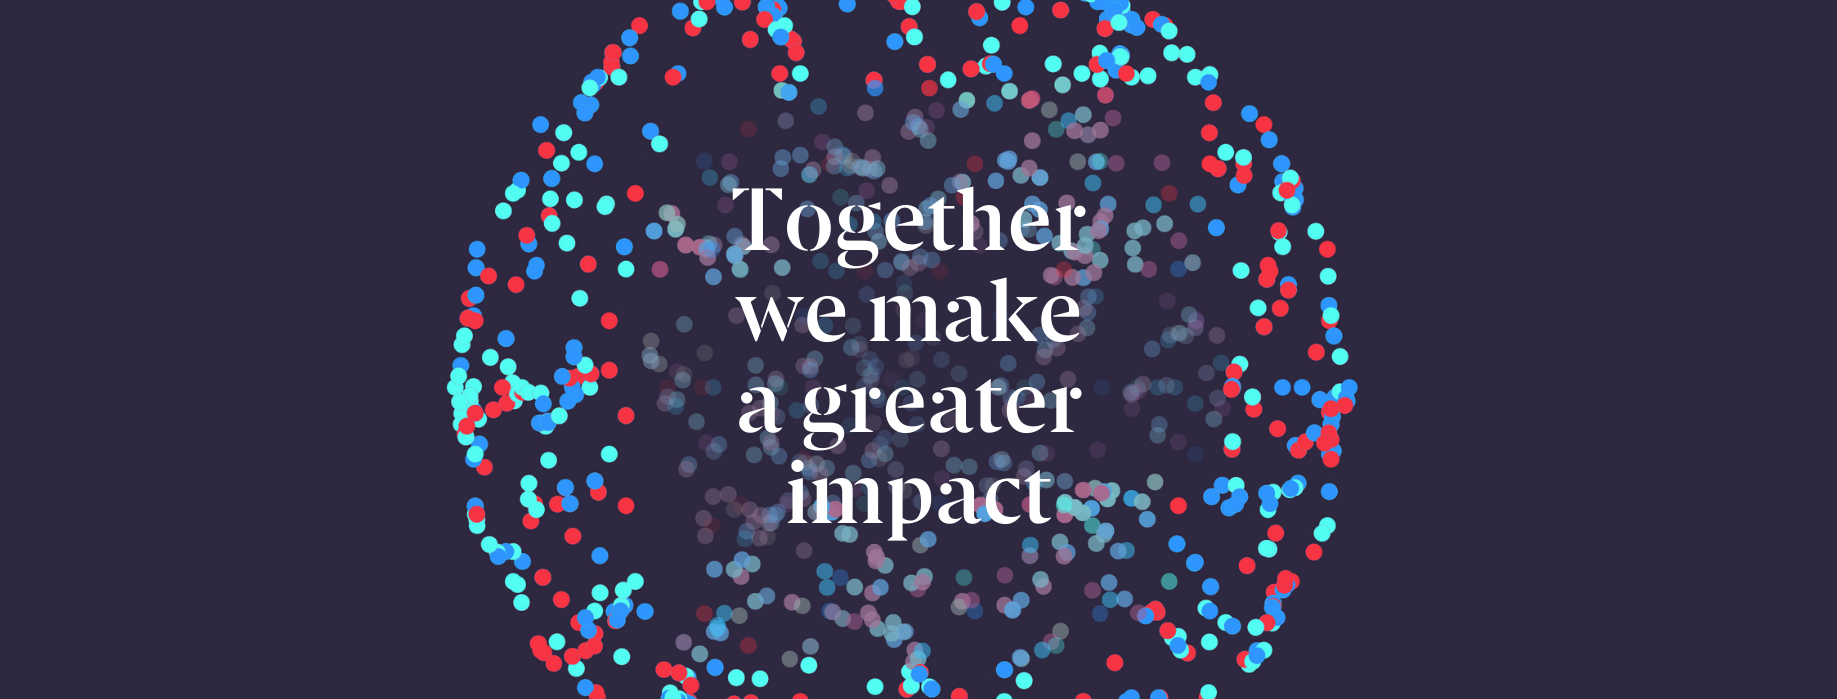 Togetther we make a greater impact